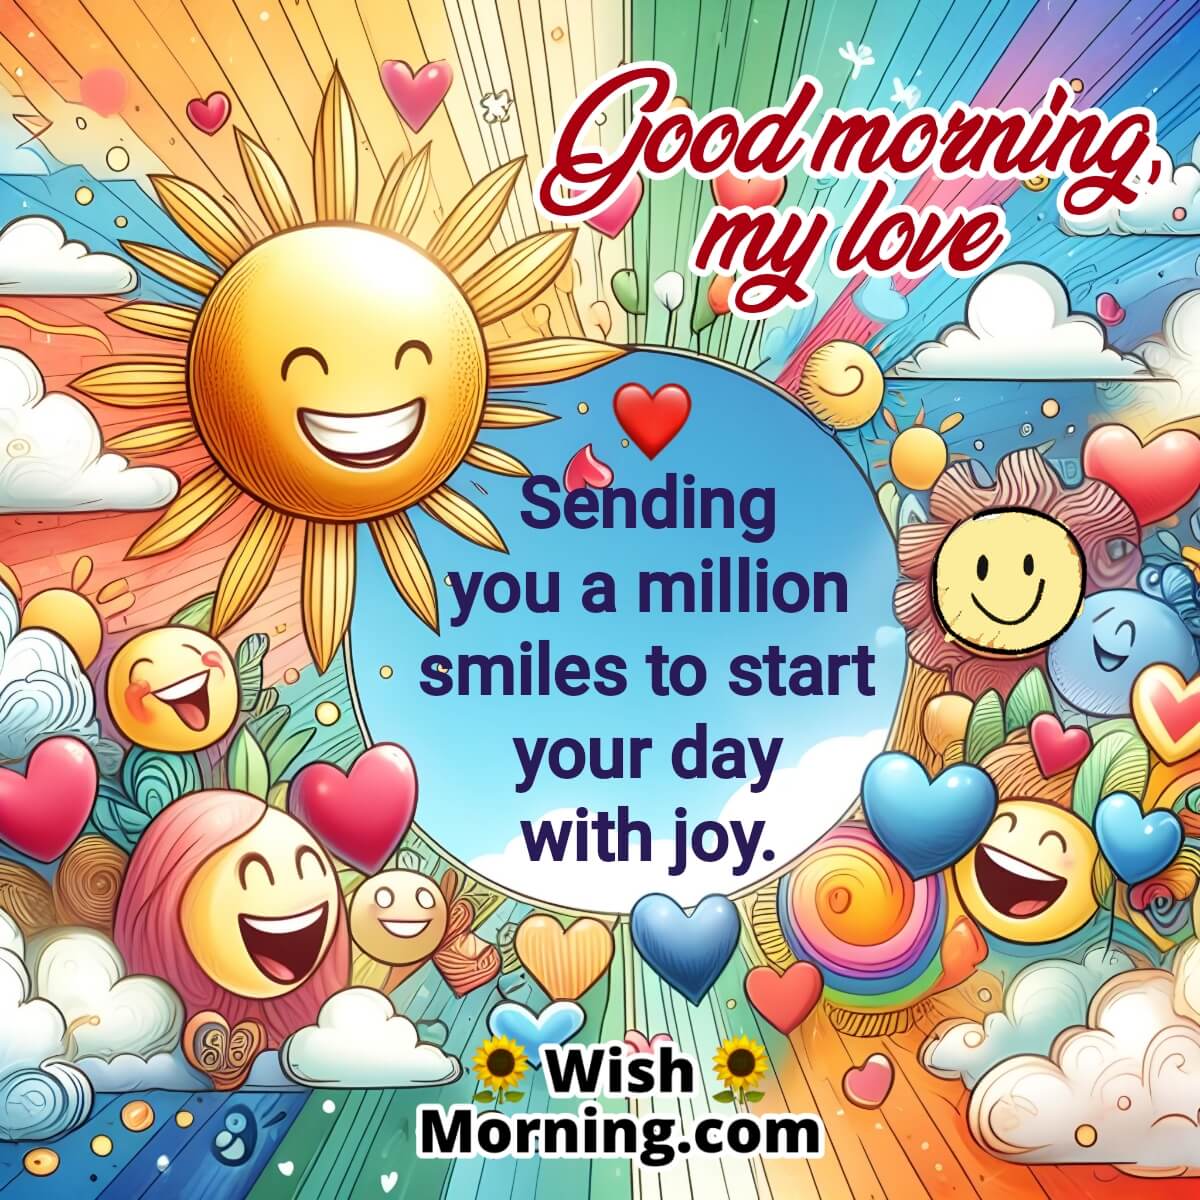 Good Morning Wish For My Love